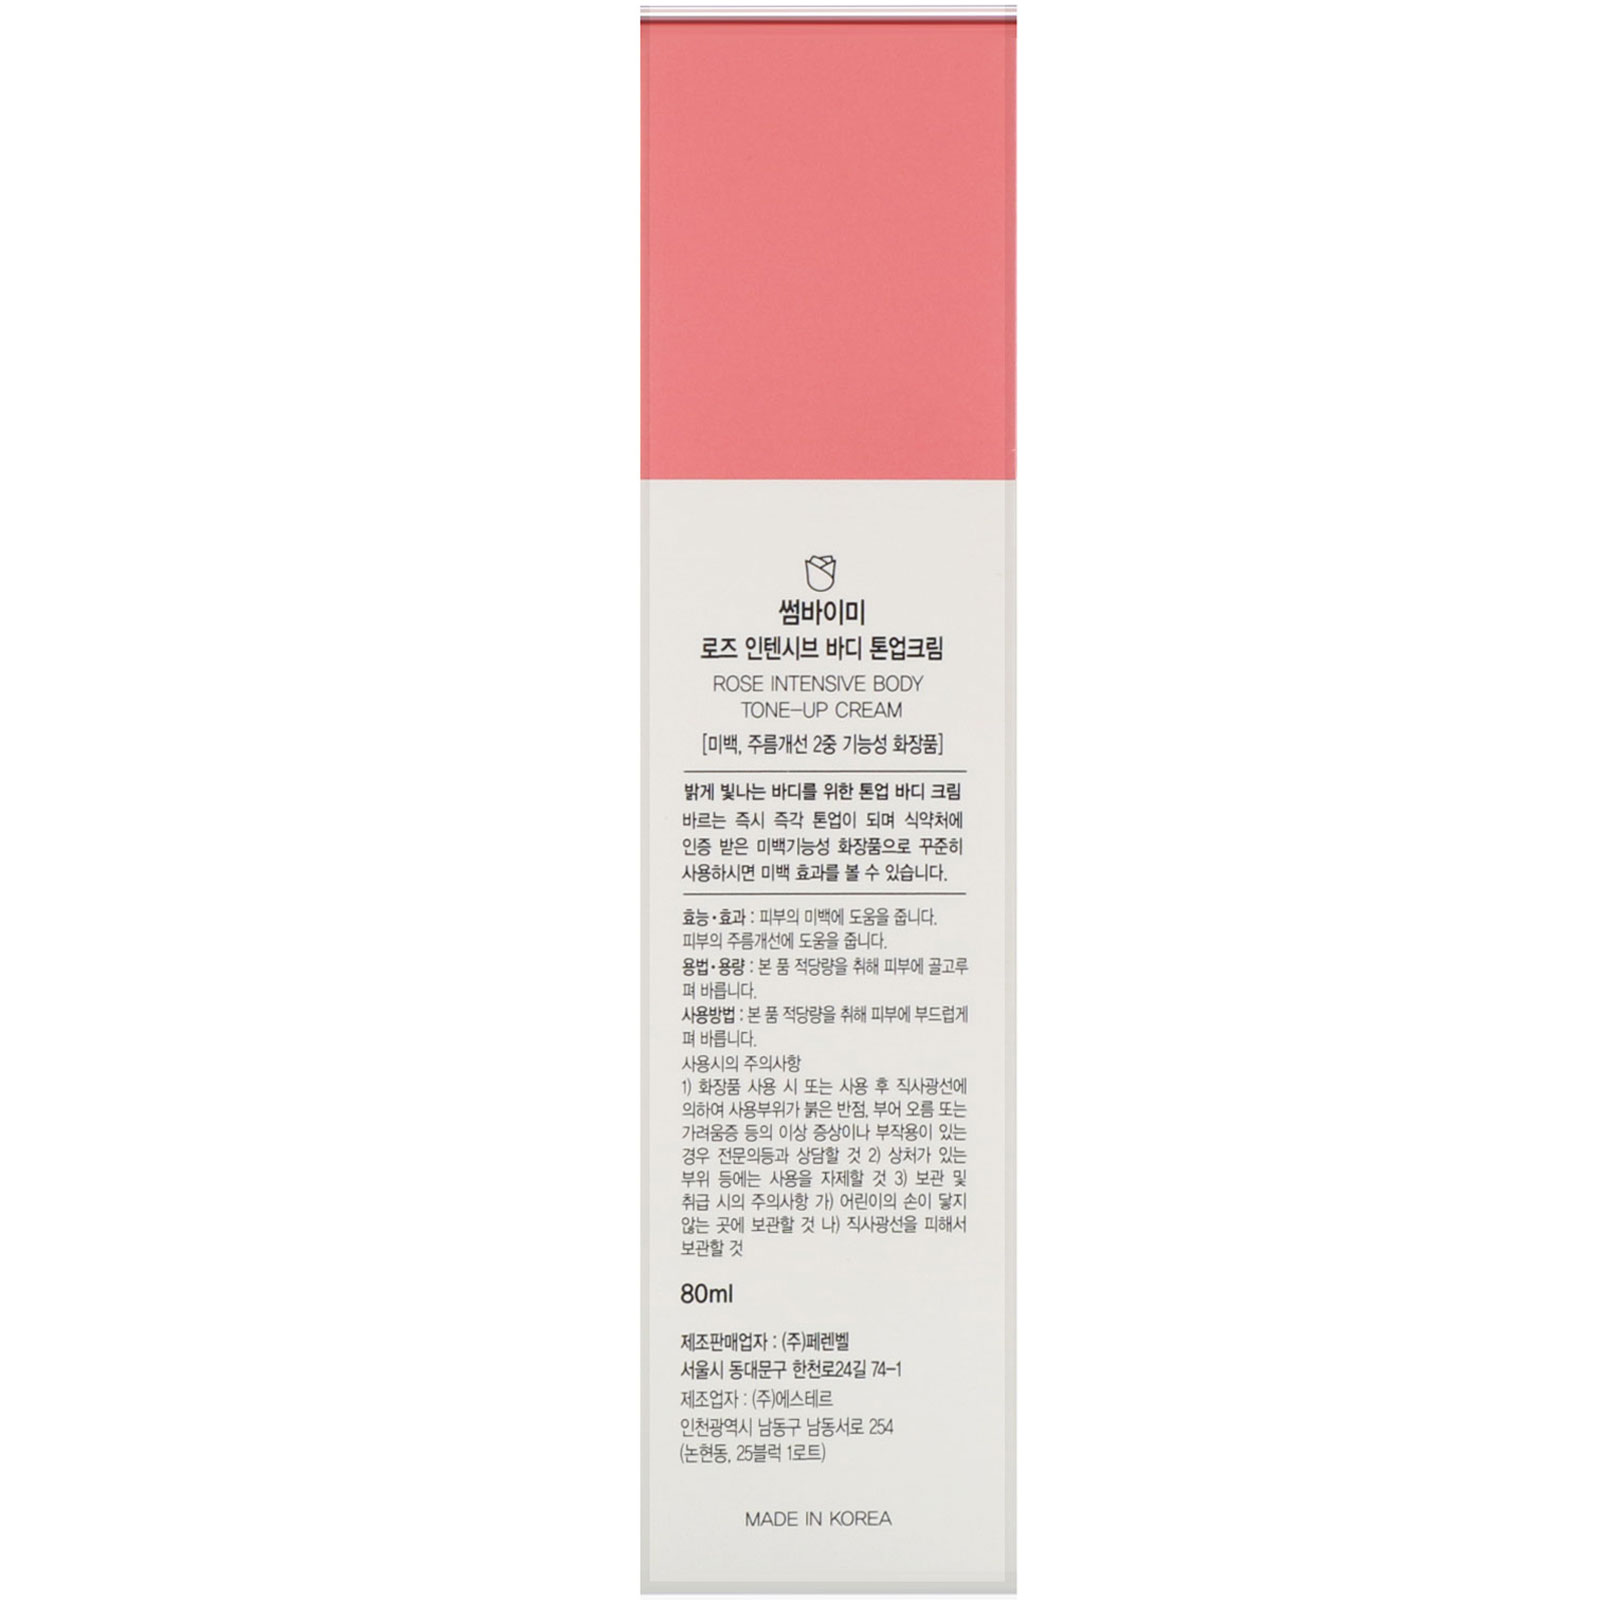 Rose Tone up Cream. Some by mi Rose Intensive Tone-up Cream (50ml). Rose intense база. Vella Intensive Tone up отзывы. Tone up cream отзывы